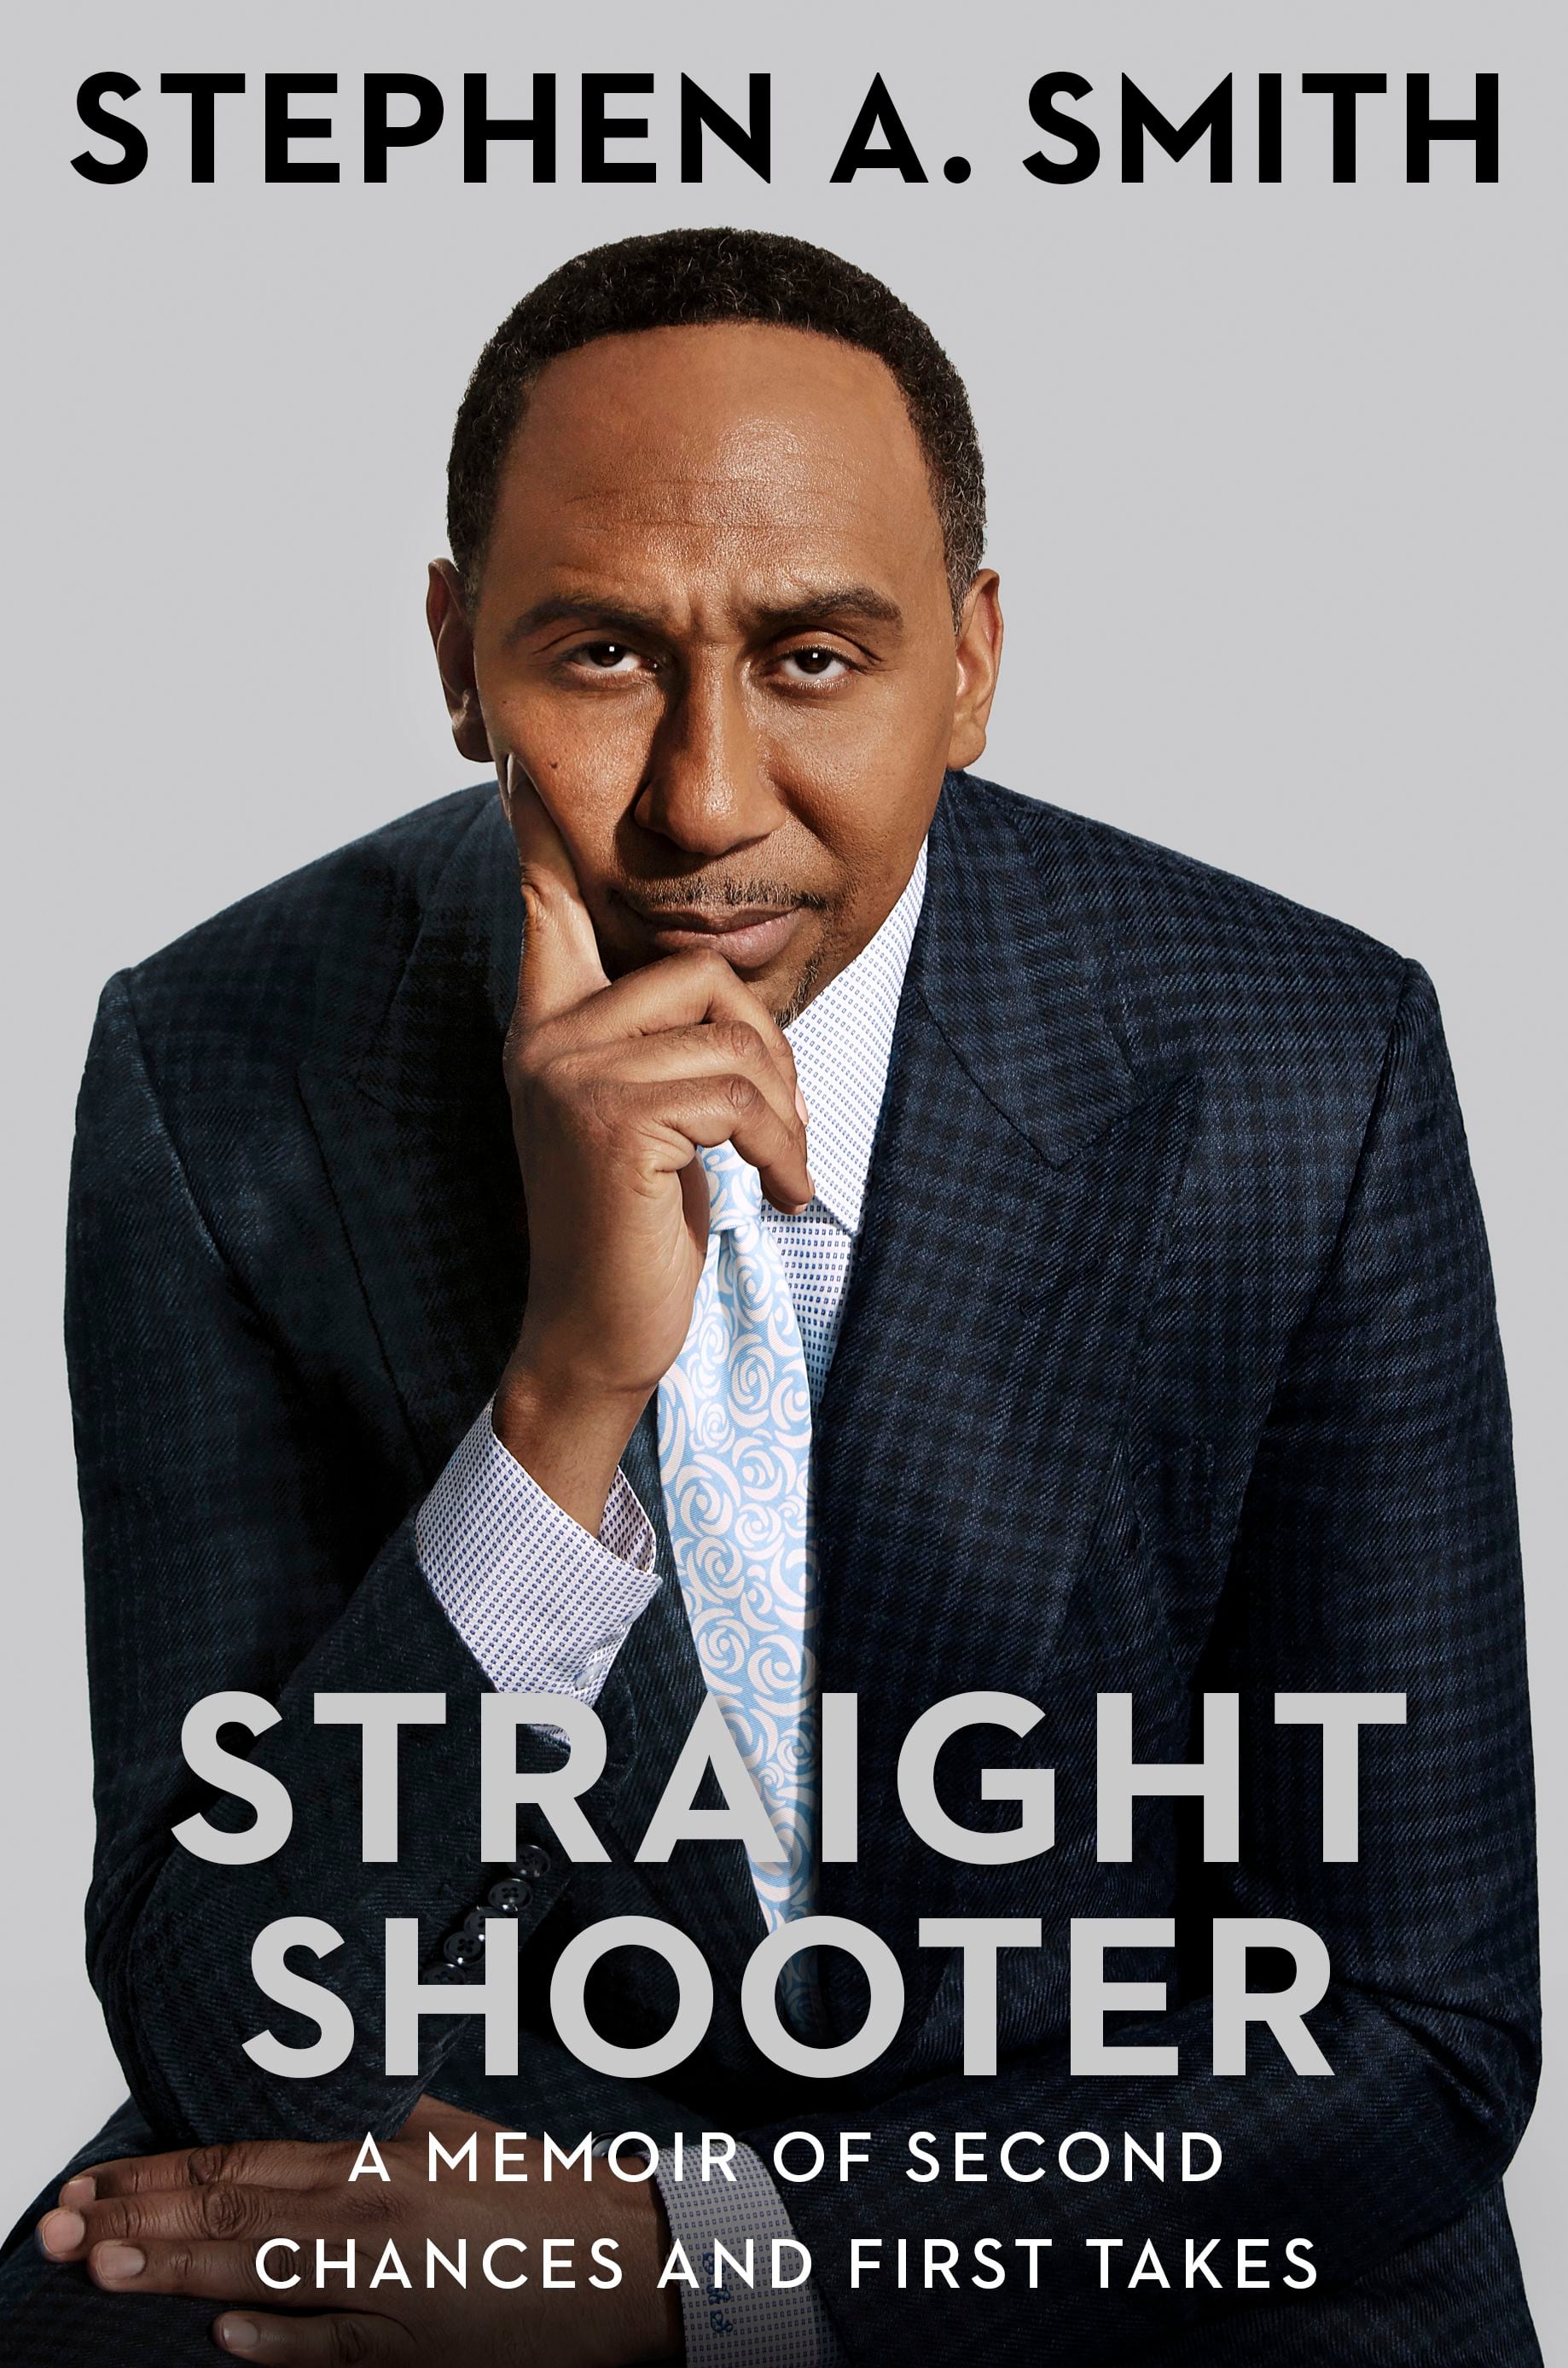 ESPN’s Stephen A Smith has memoir coming in January 2023